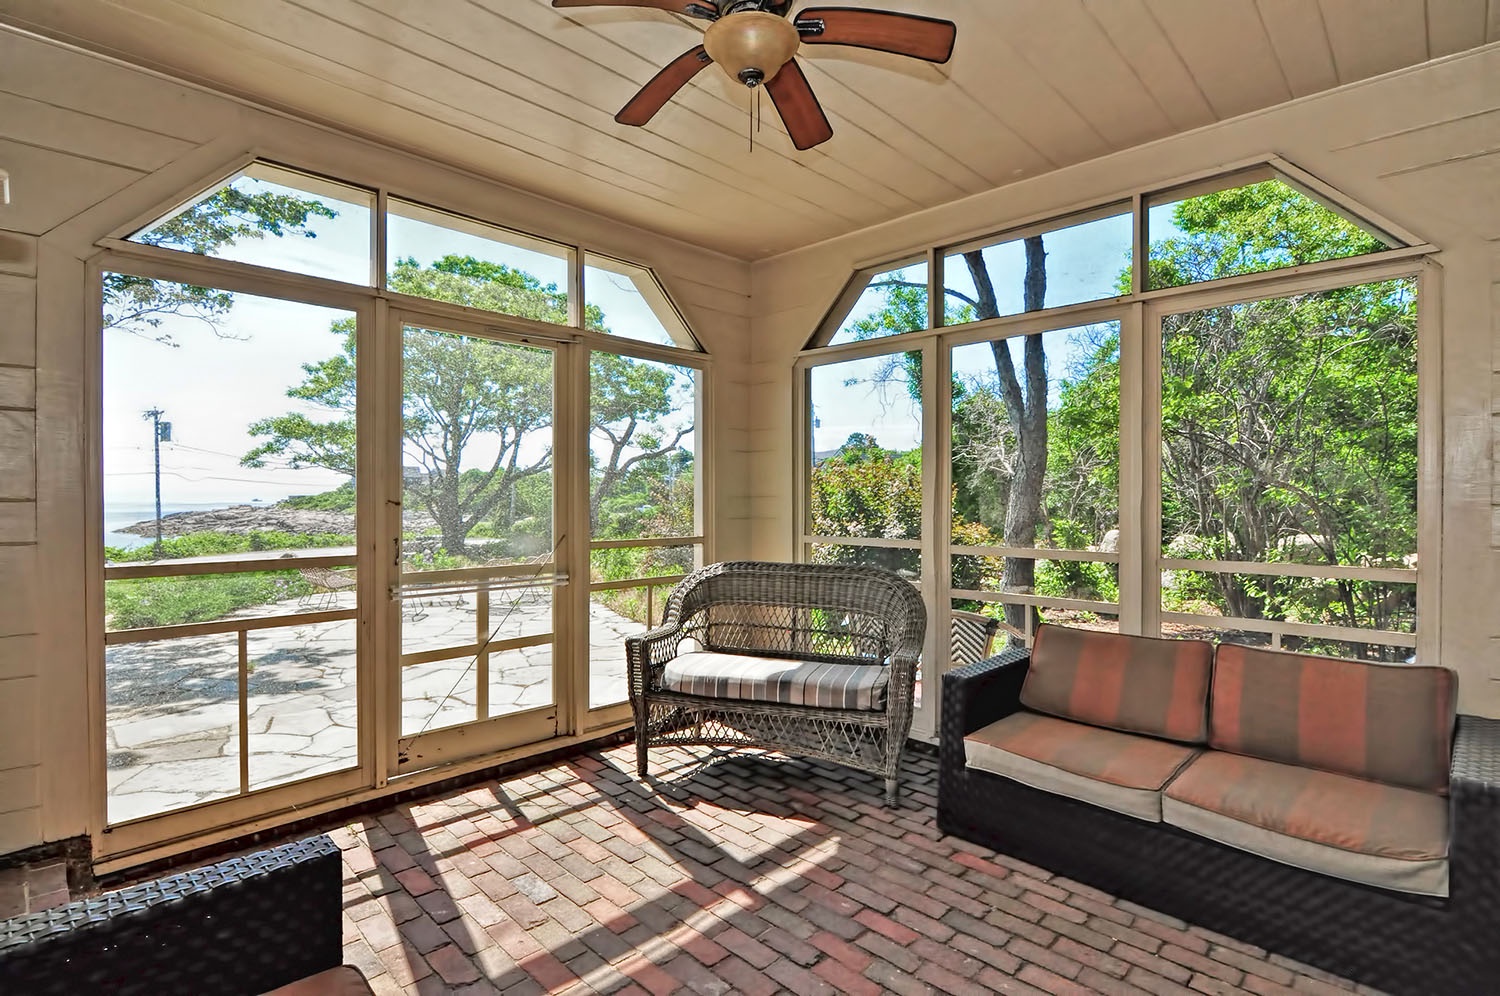 Screened porch with ocean views and ceiling fan.